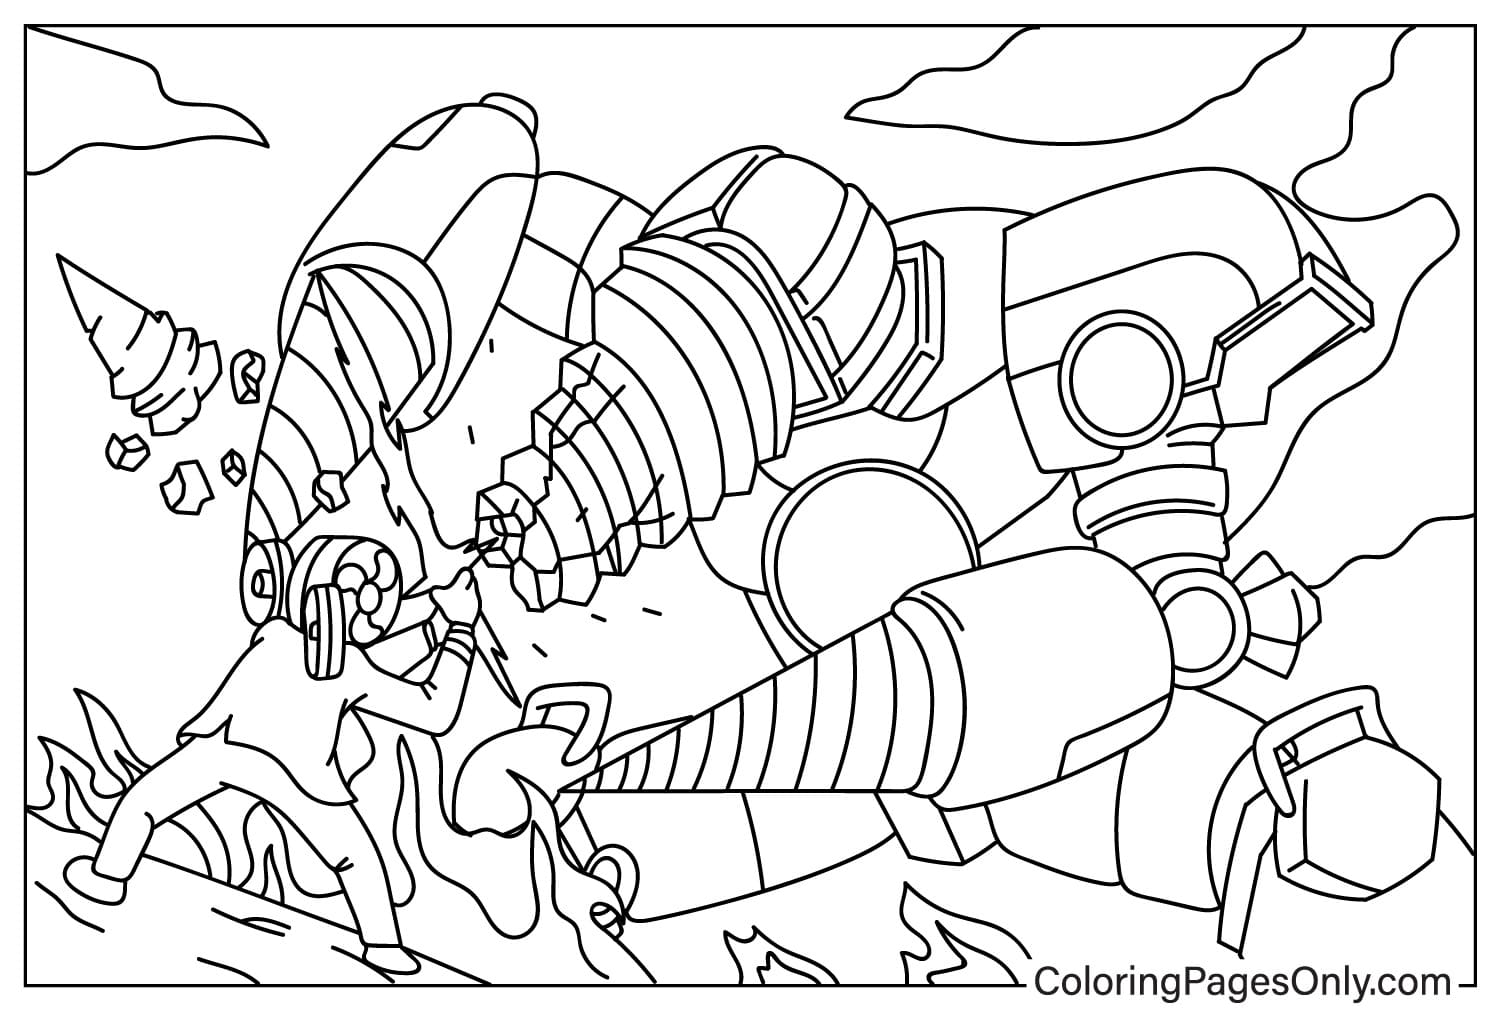 Upgraded Titan Drill Man Fight Coloring Page from Upgraded Titan Drill Man